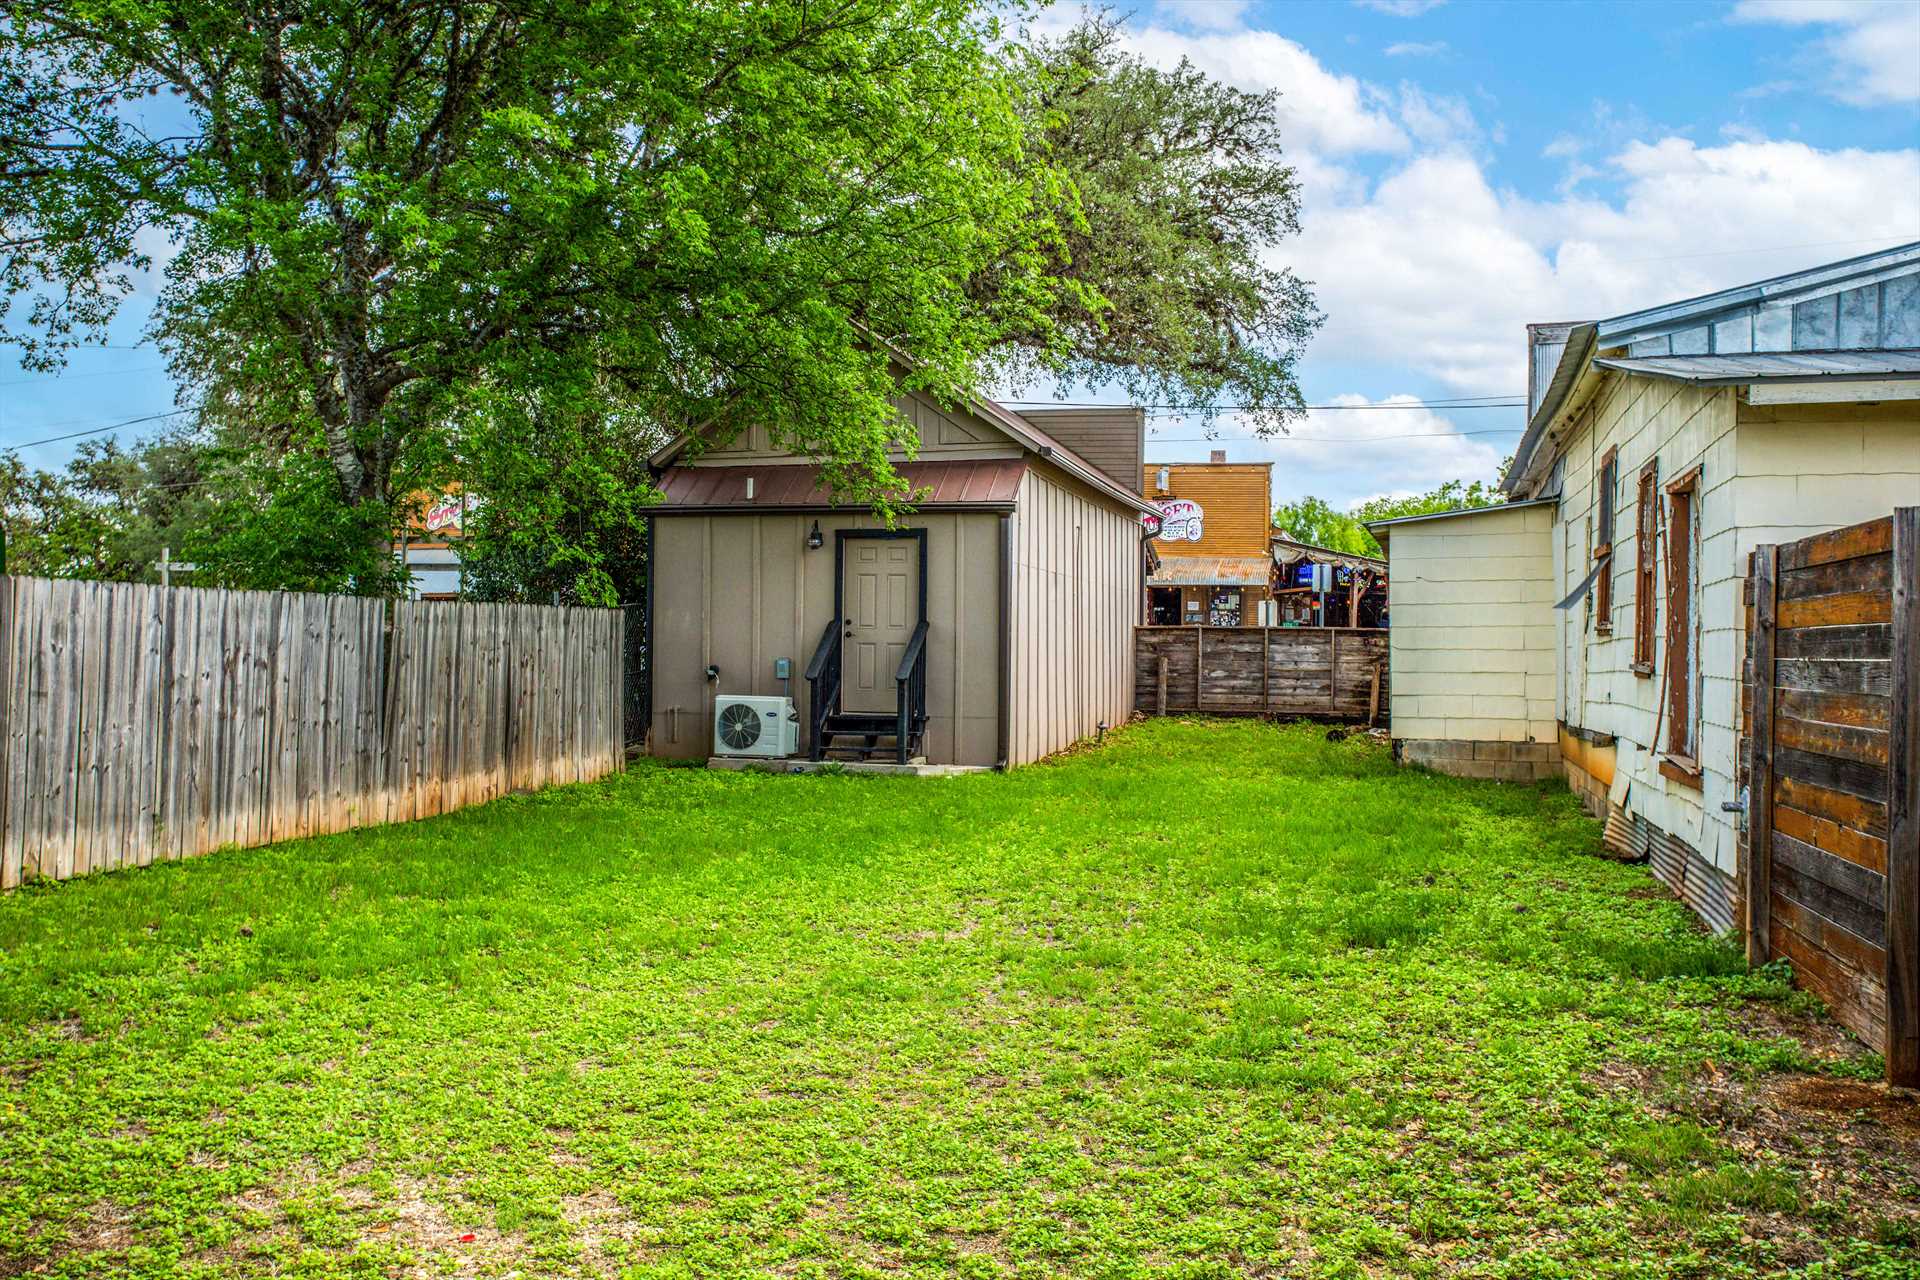                                                 You''l have a cozy little back yard here, too! All this is within walking distance of the best attractions in Bandera.